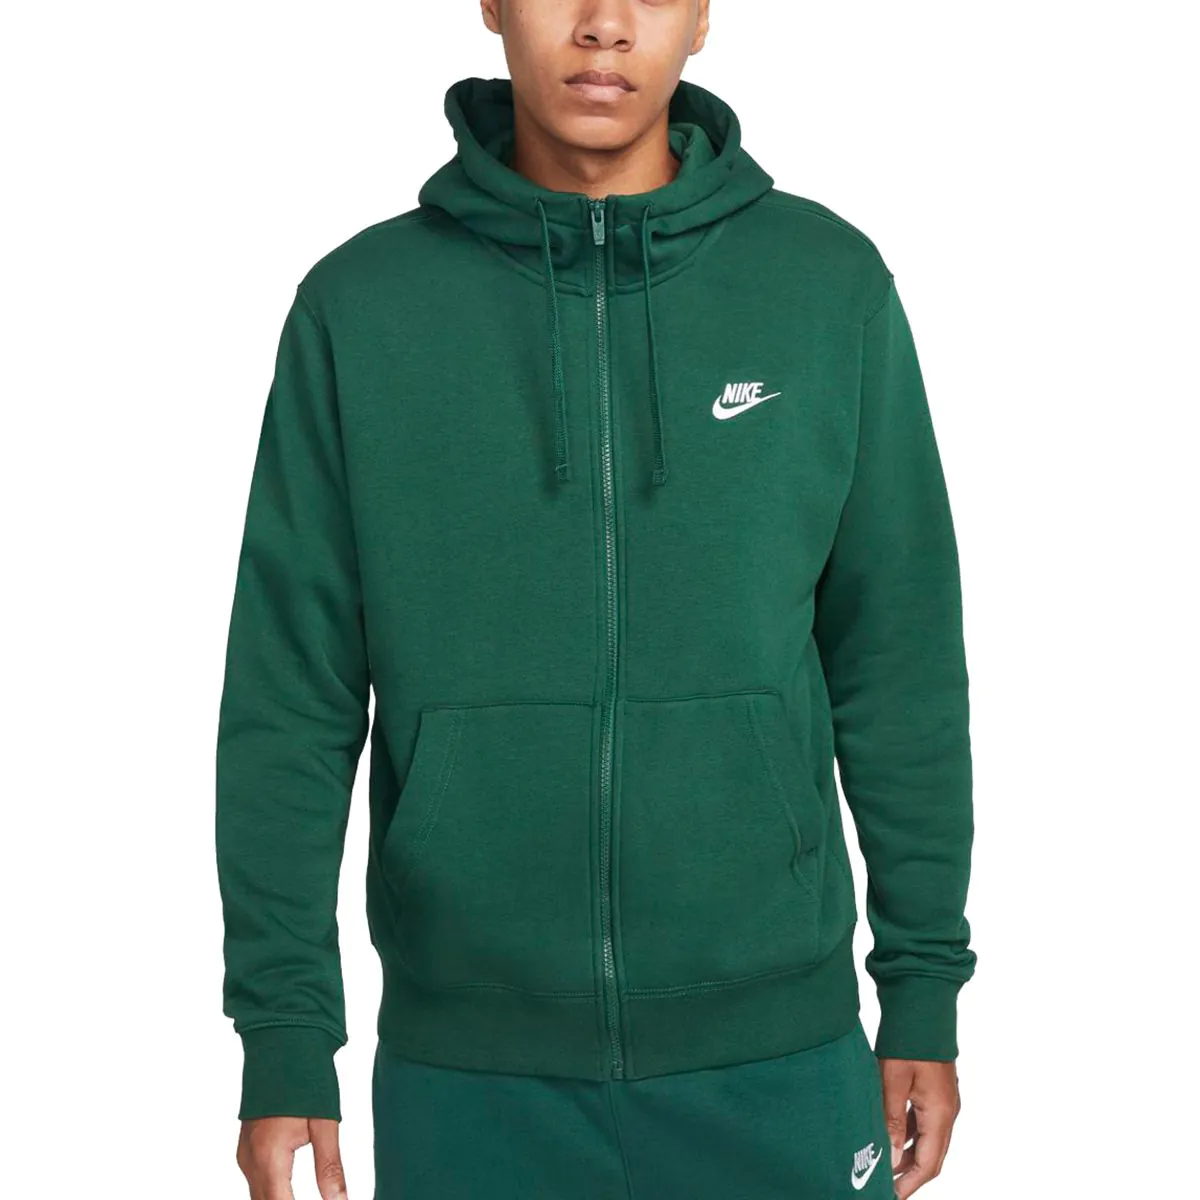 plot Cruelty Th nike zip hoodie green unforgivable broadcast Expectation